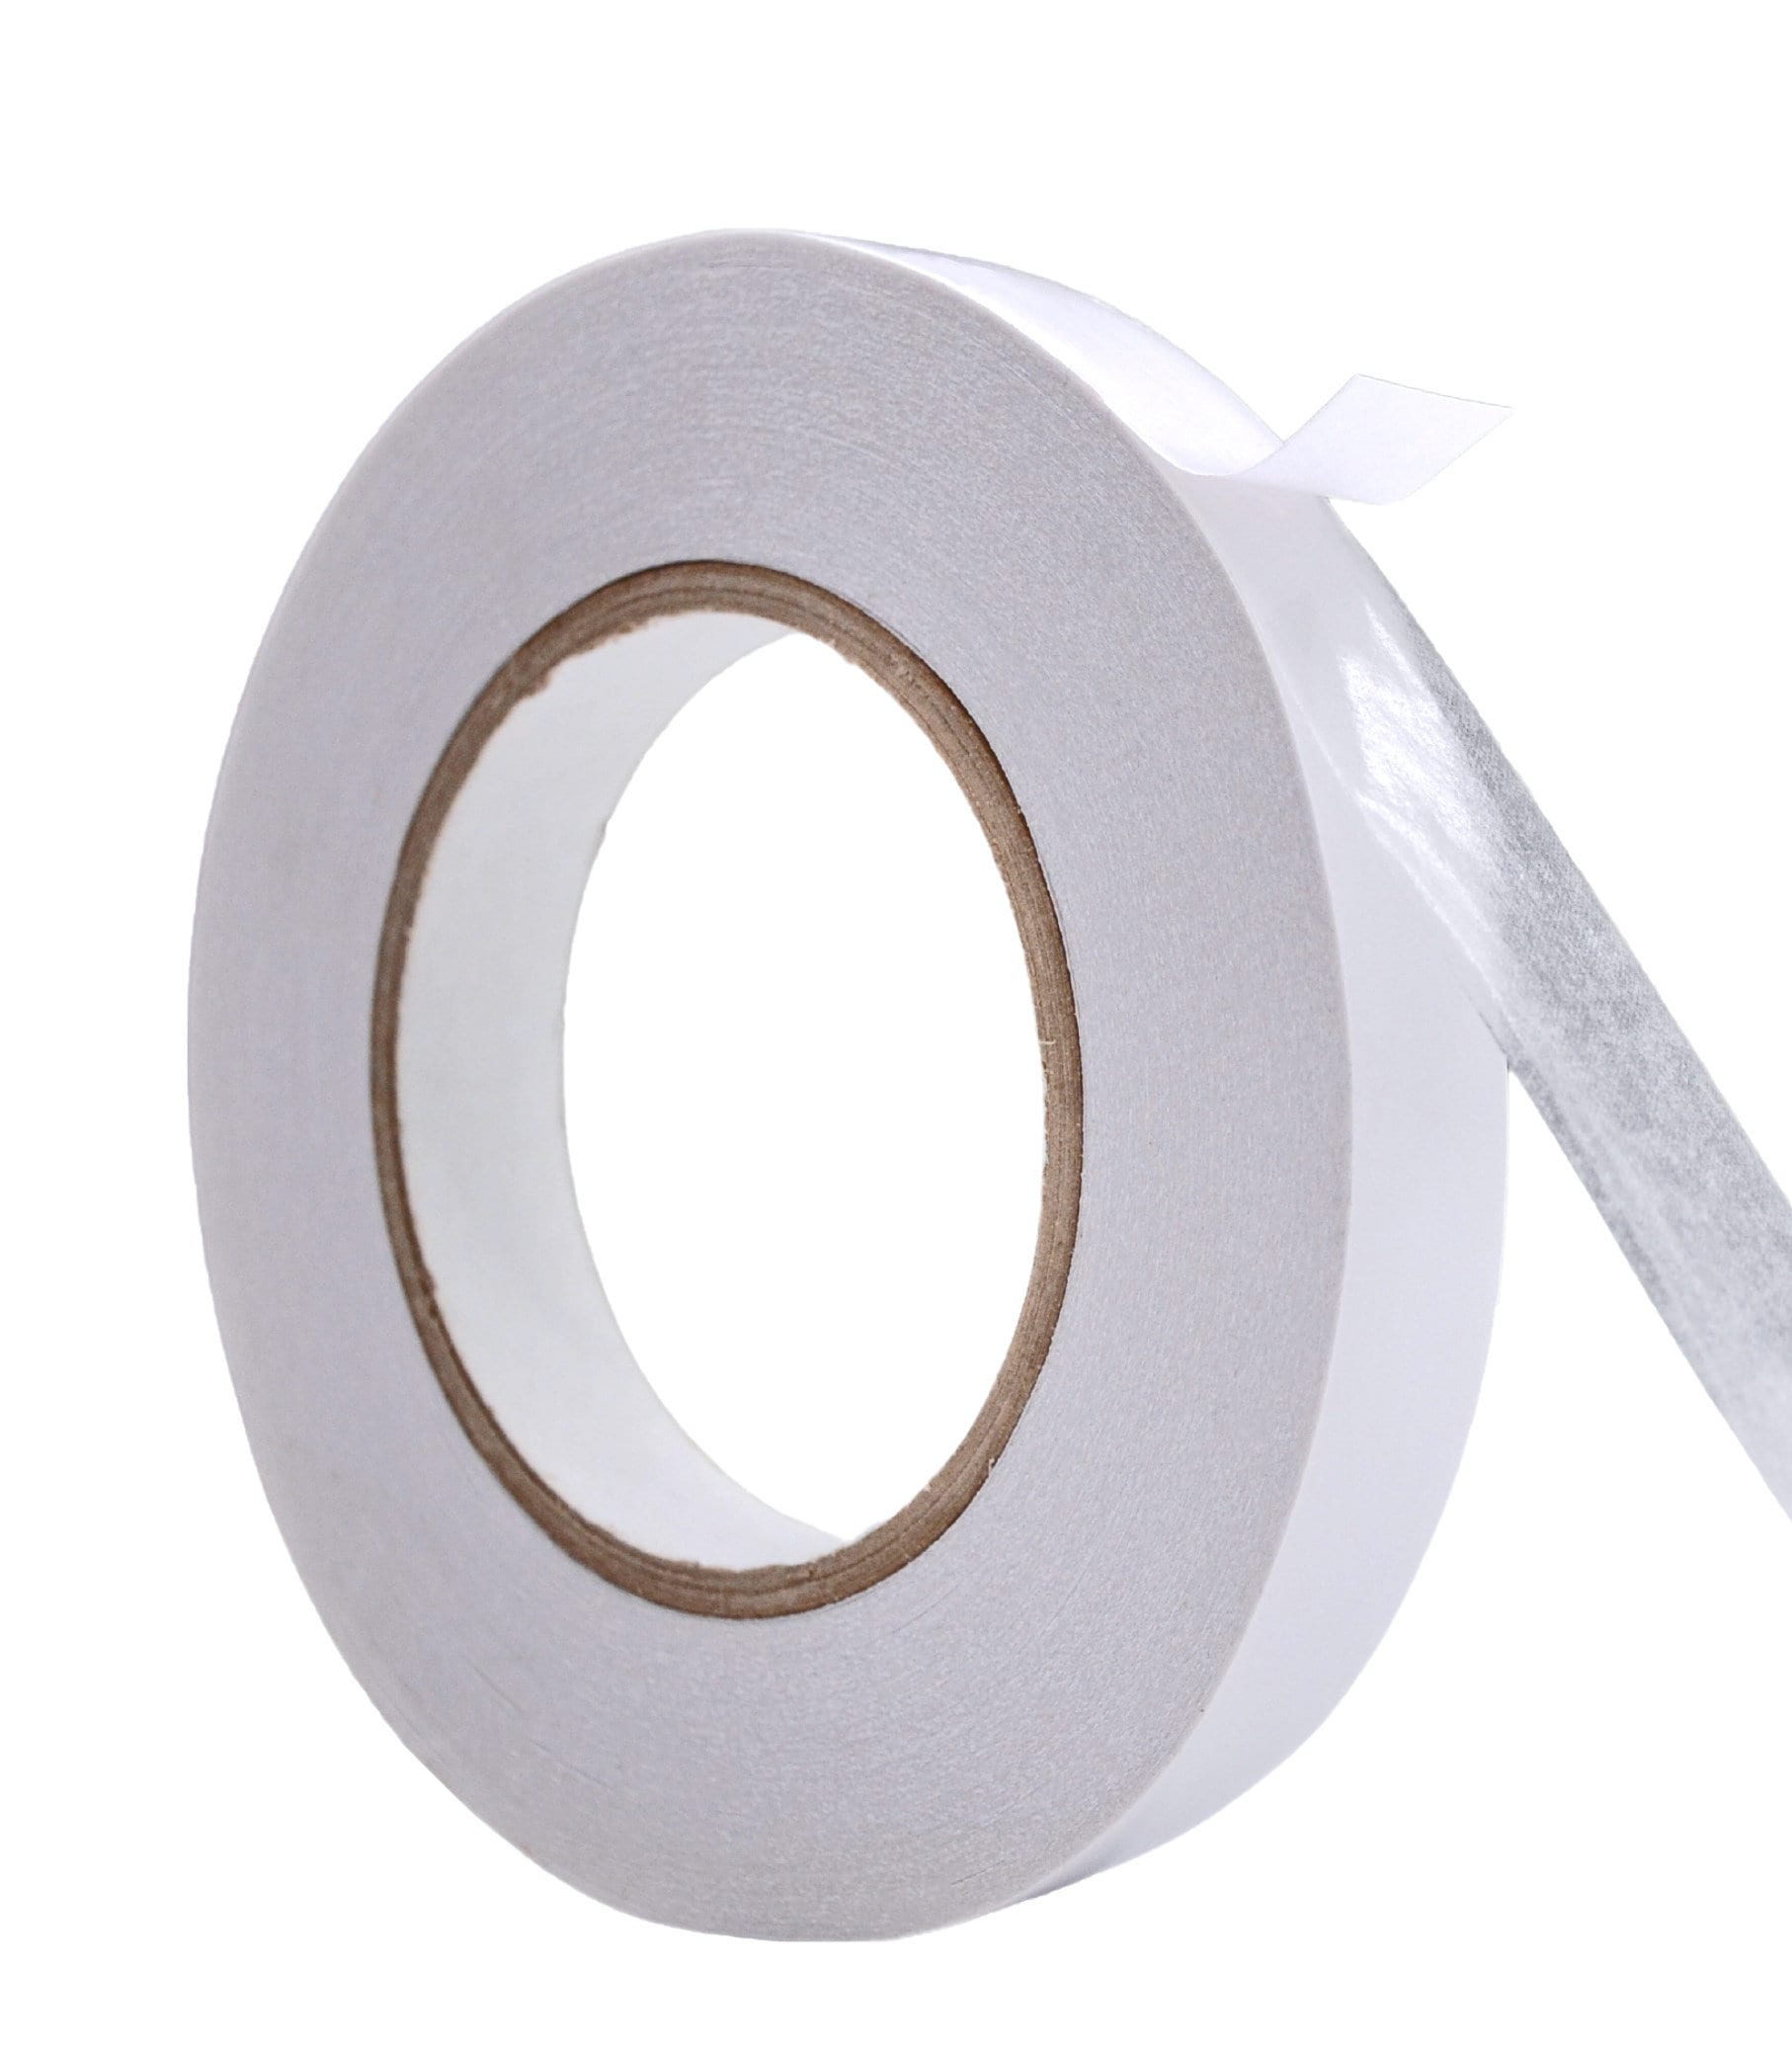 MeltFuse Vilene iron double-sided adhesive tape MF tape 5 mm width x 25 m volume 